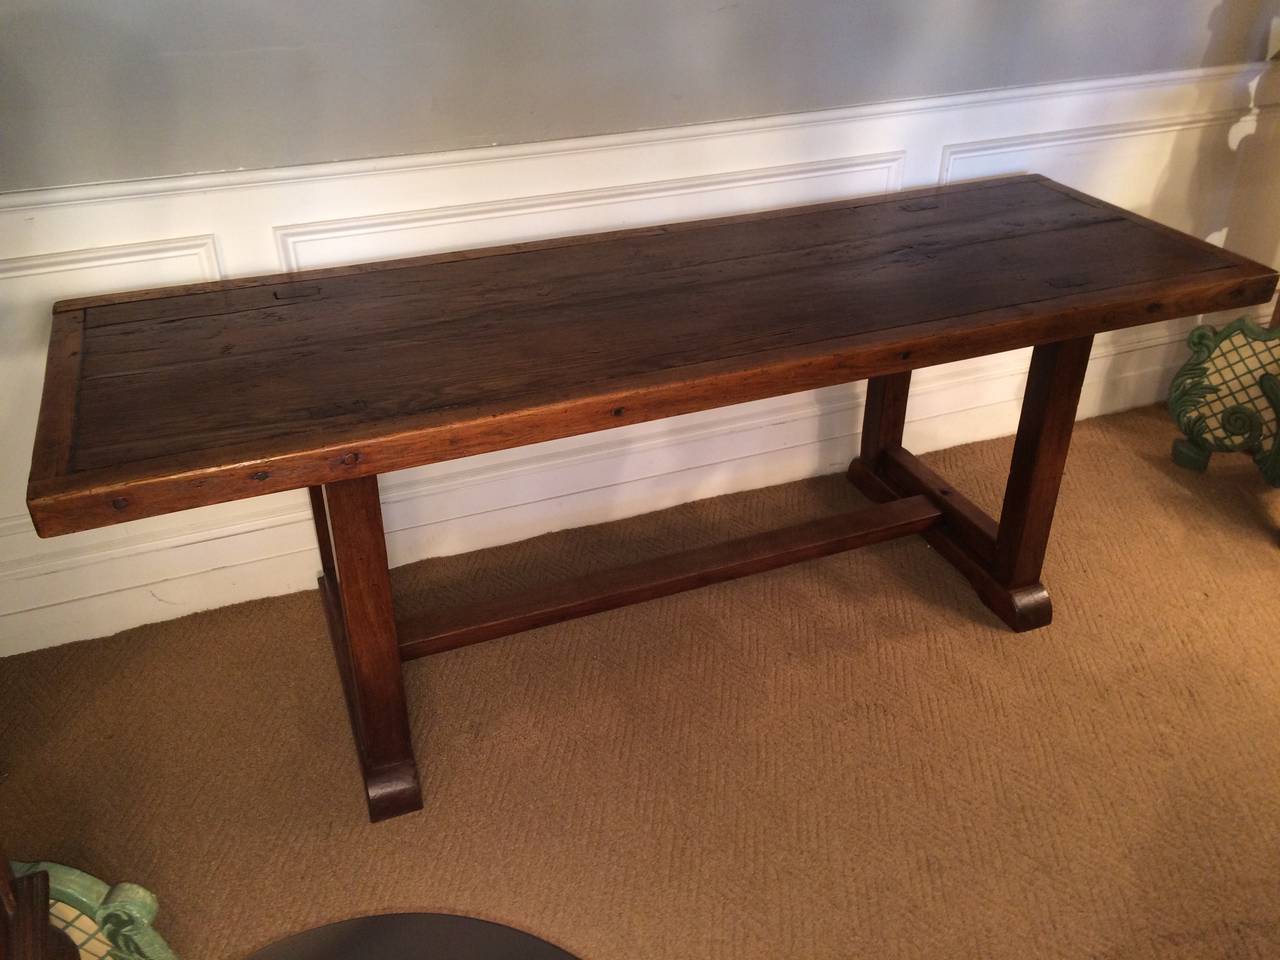 American Arts and Crafts period rustic refectory or farm table beautifully made with mortise and tenon and pegged construction. A handsome and solid table with a warm patina.